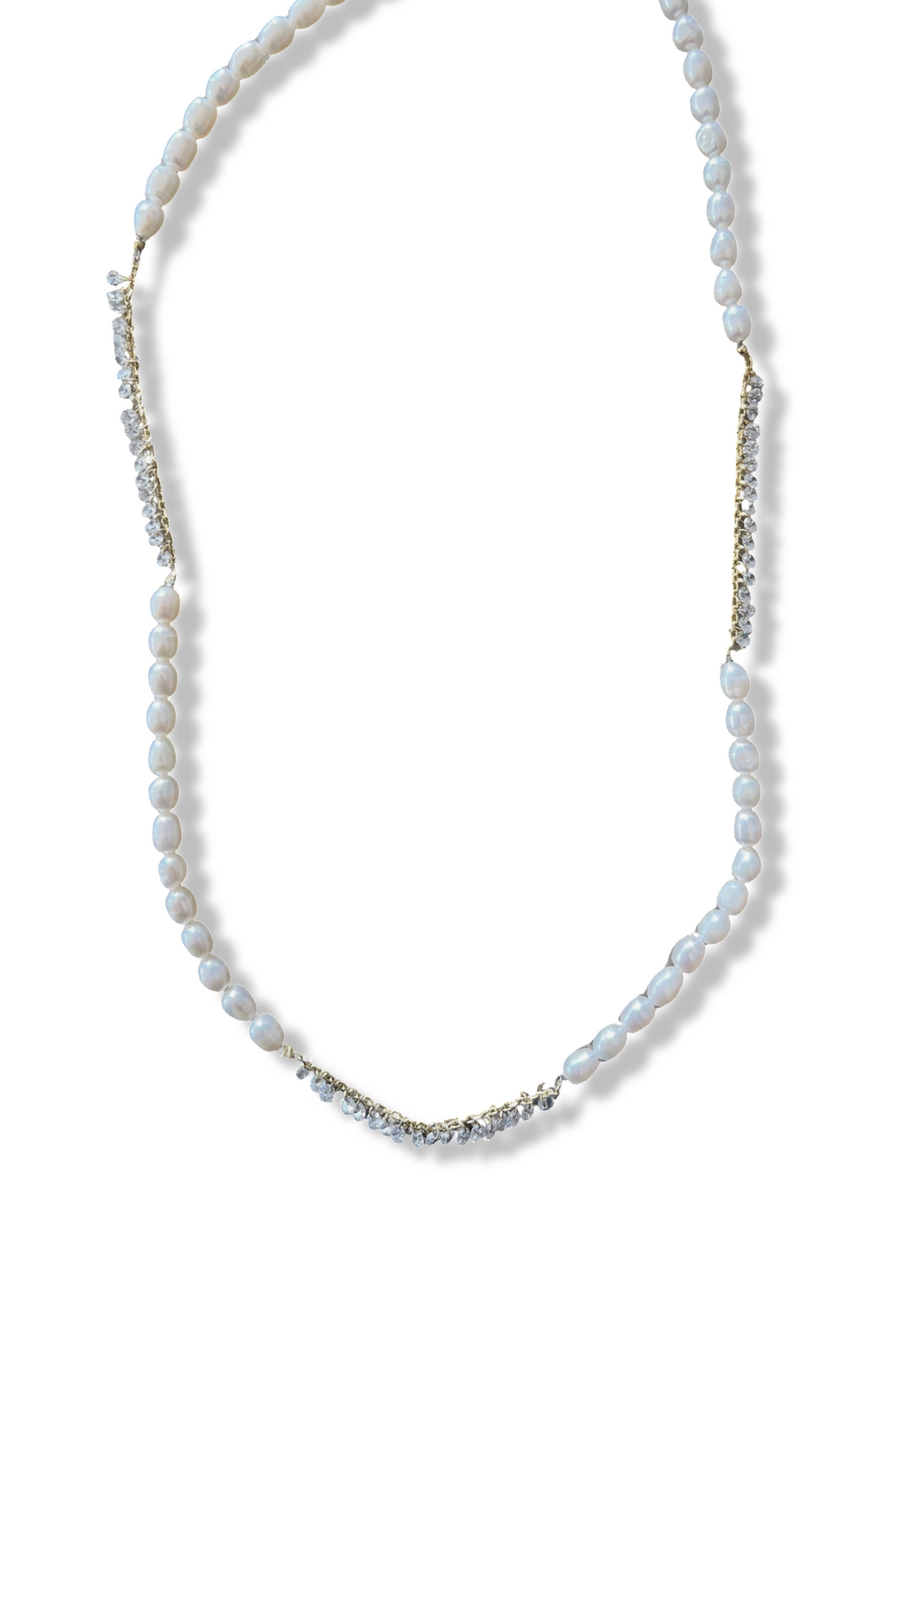 Adriana pearl necklace